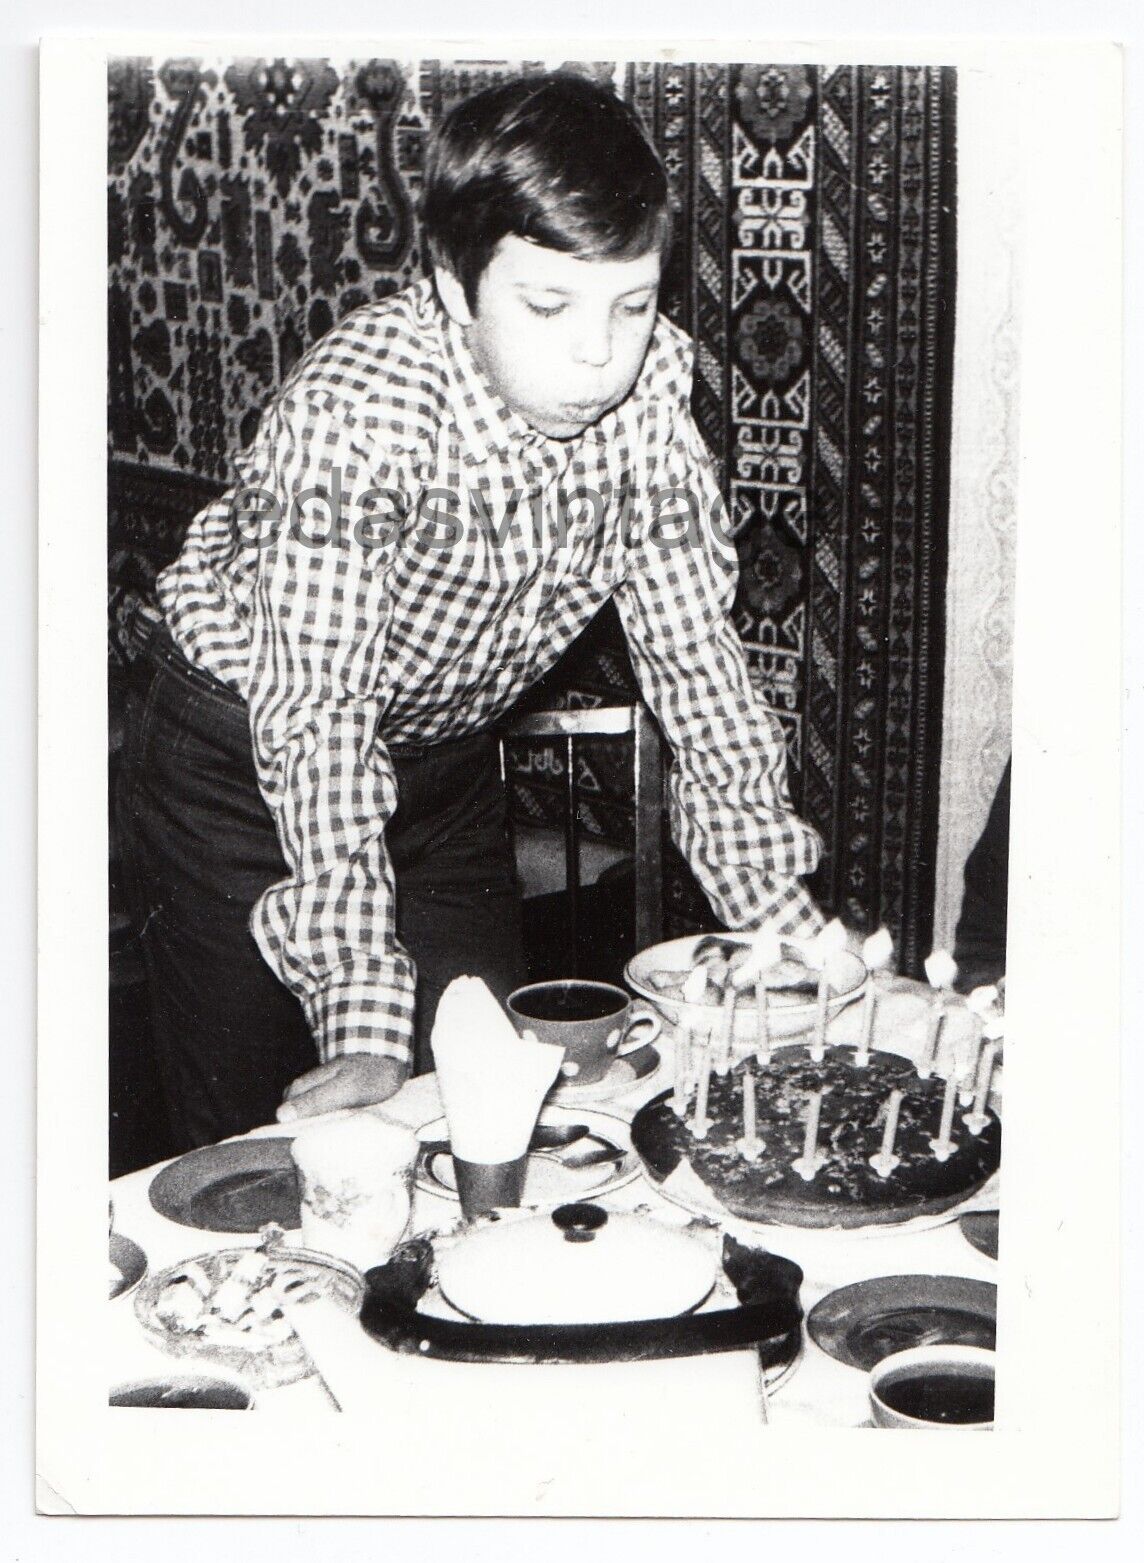 Birthday cake Young boy teen blowing out the candles original vintage photo USSR